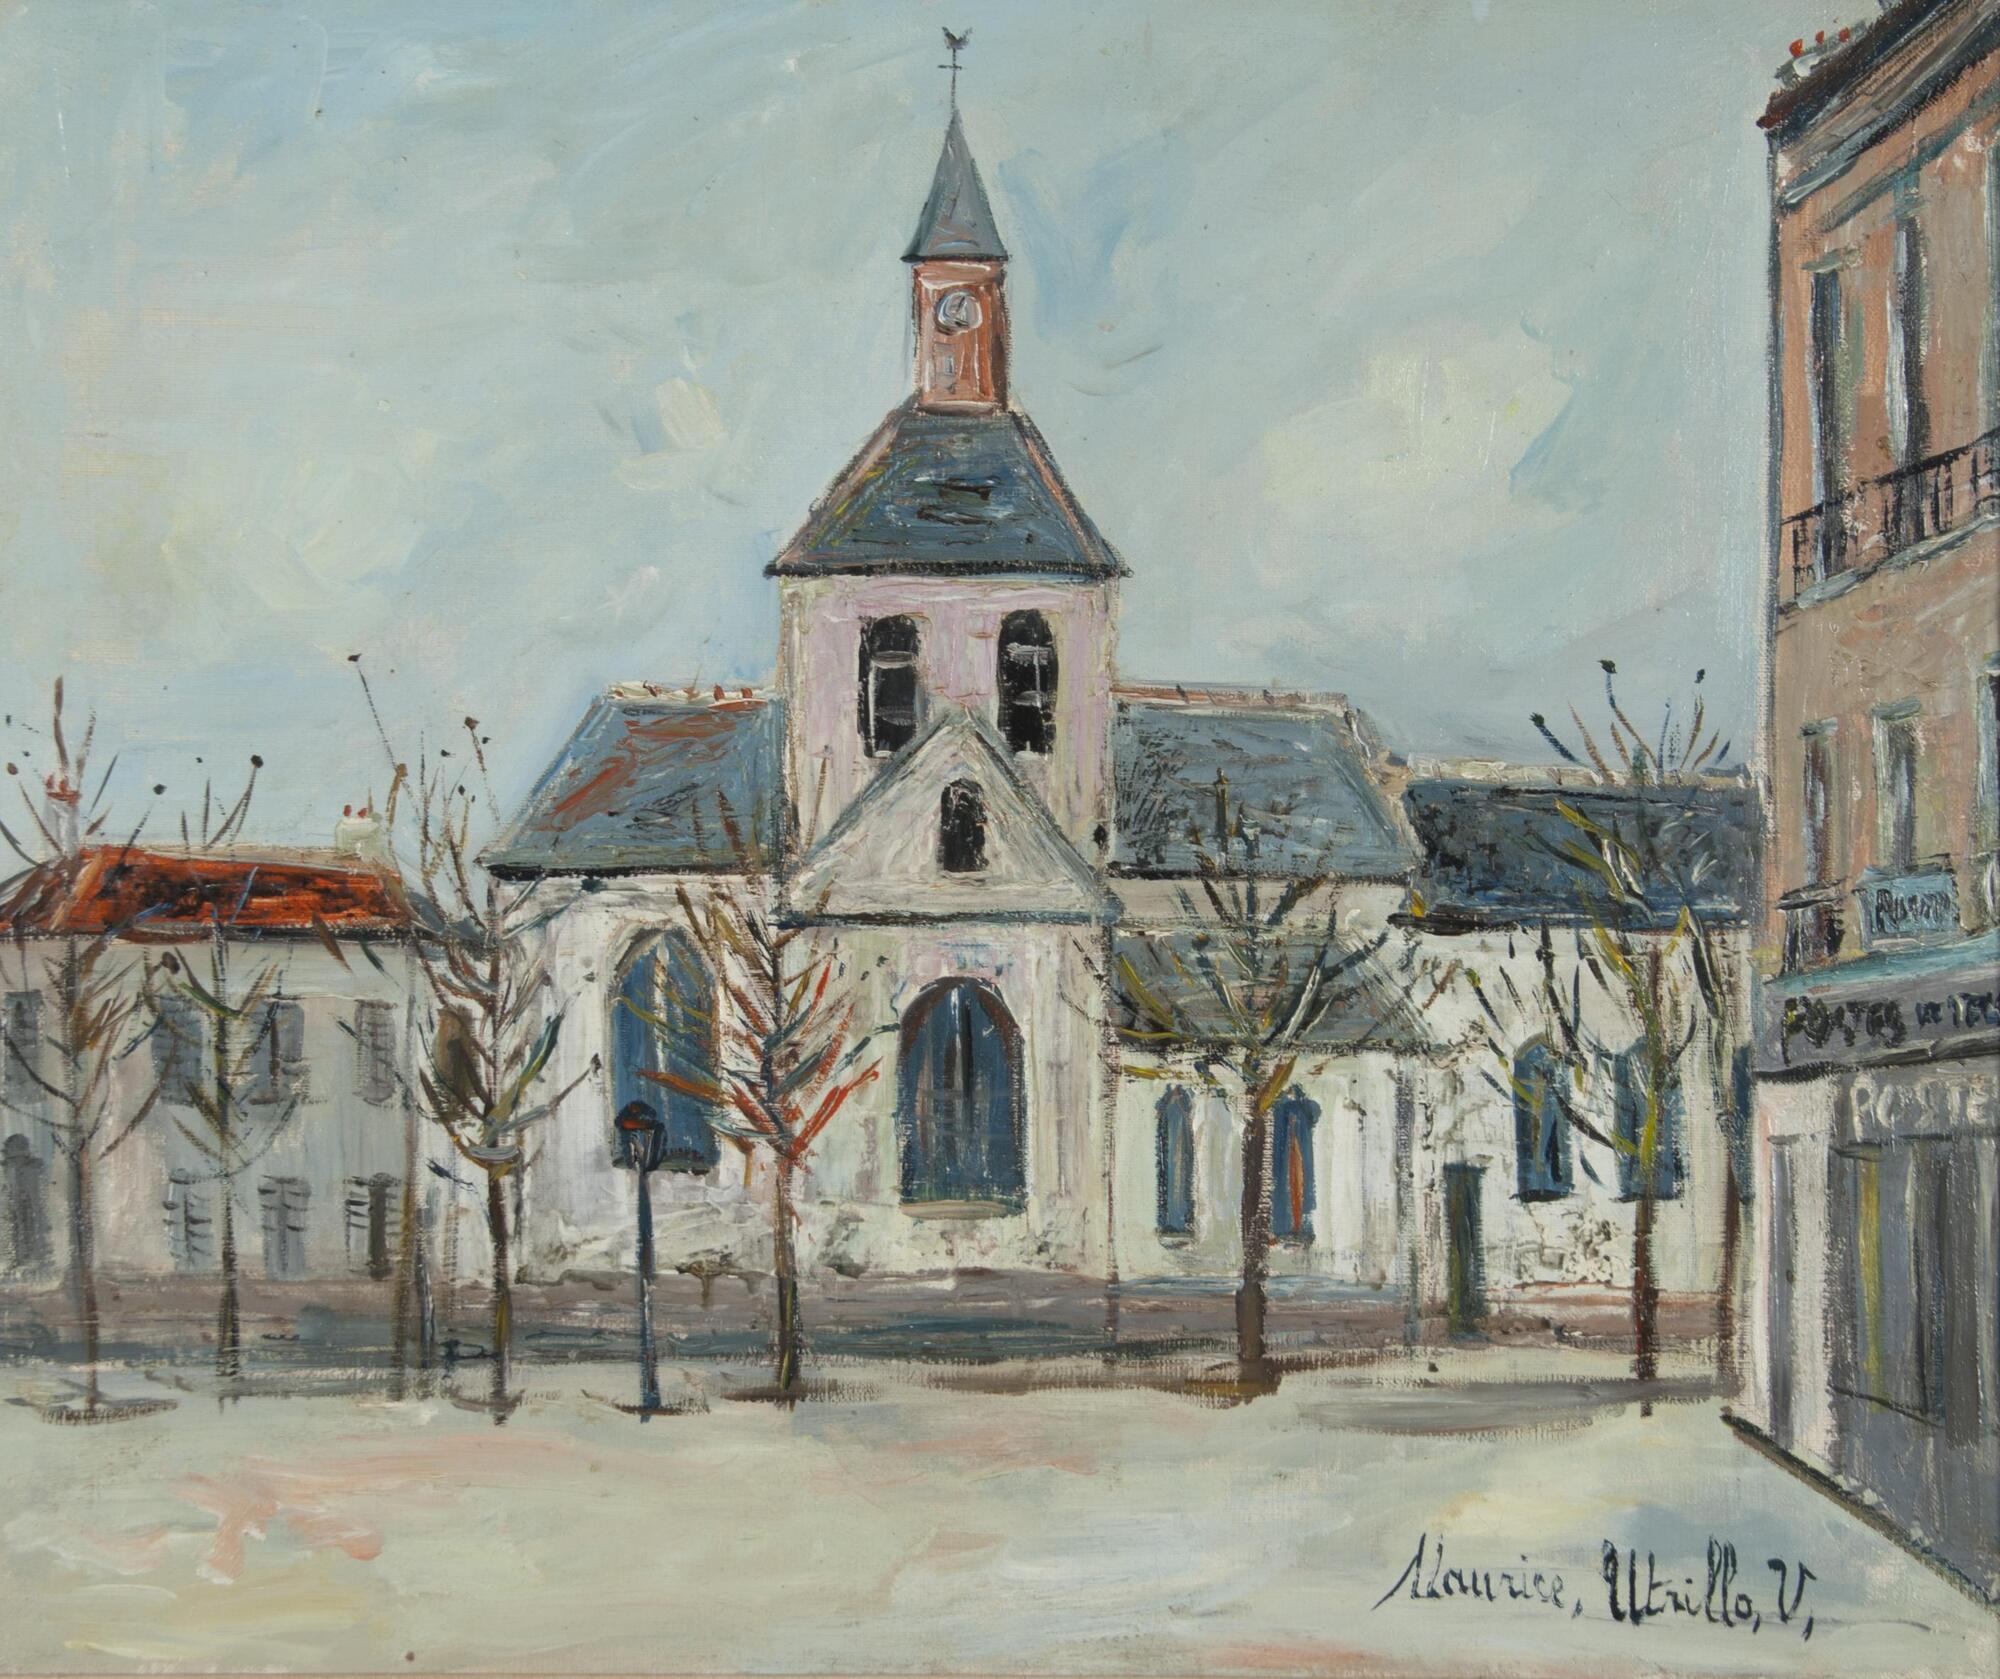 A winter scene with a steepled church in the center surrounded by other buildings, including a three-story building on the right hand side. A bird perches on top of the steeple. Snow covers the ground and the trees in front of the church are bare. Pinks, whites, browns and blues dominate the palette.